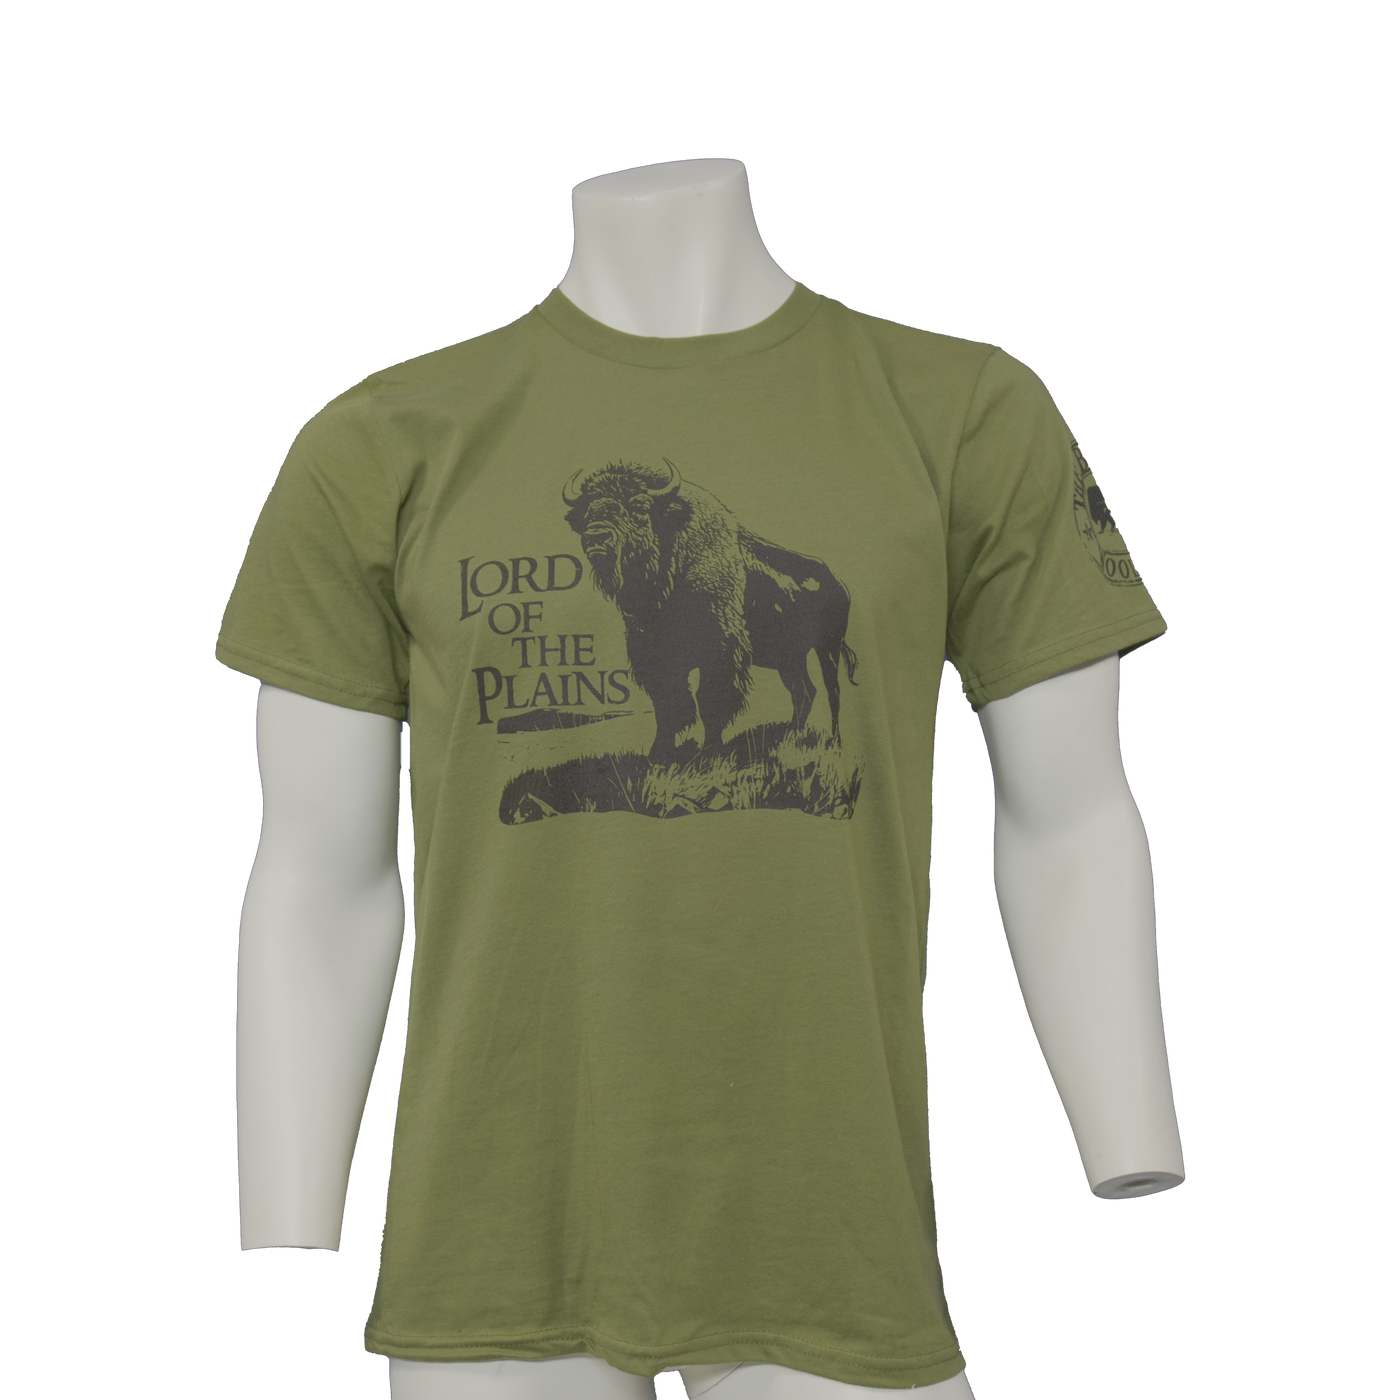 "Lord of the Plains" Shirt